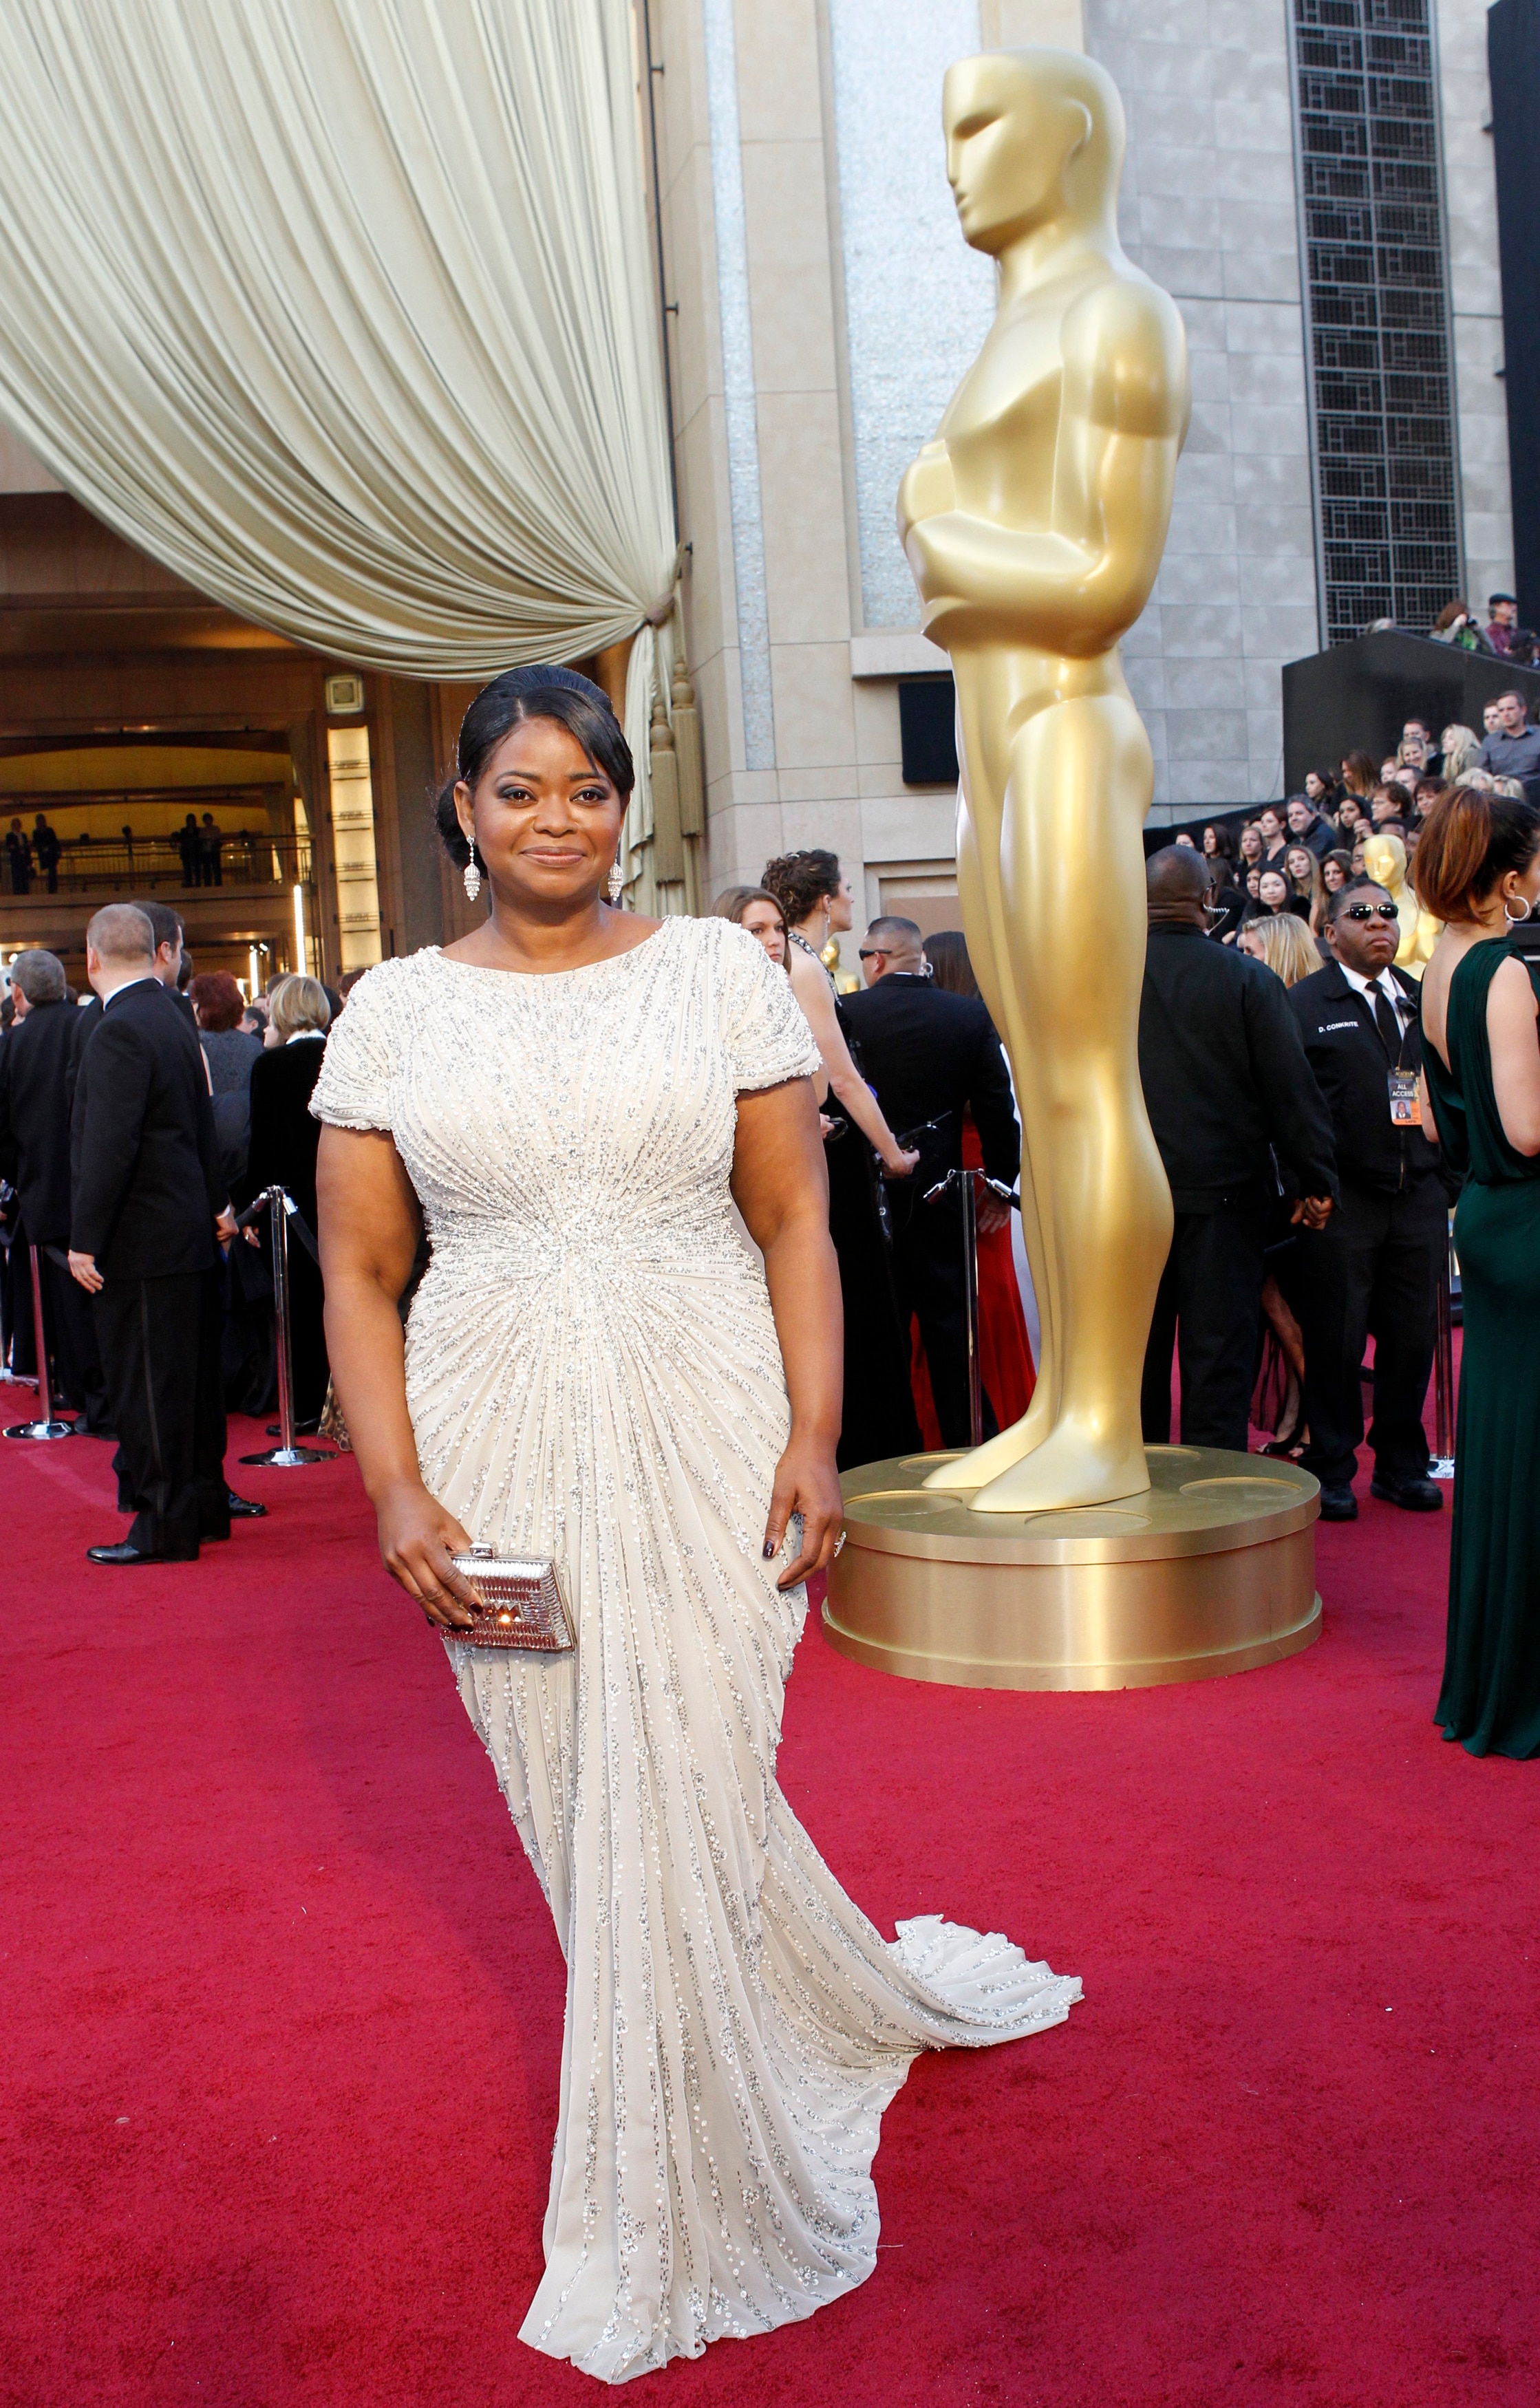 Octavia Spencer wearing a white sparkly gown with t-shirt-like sleeves and a long train